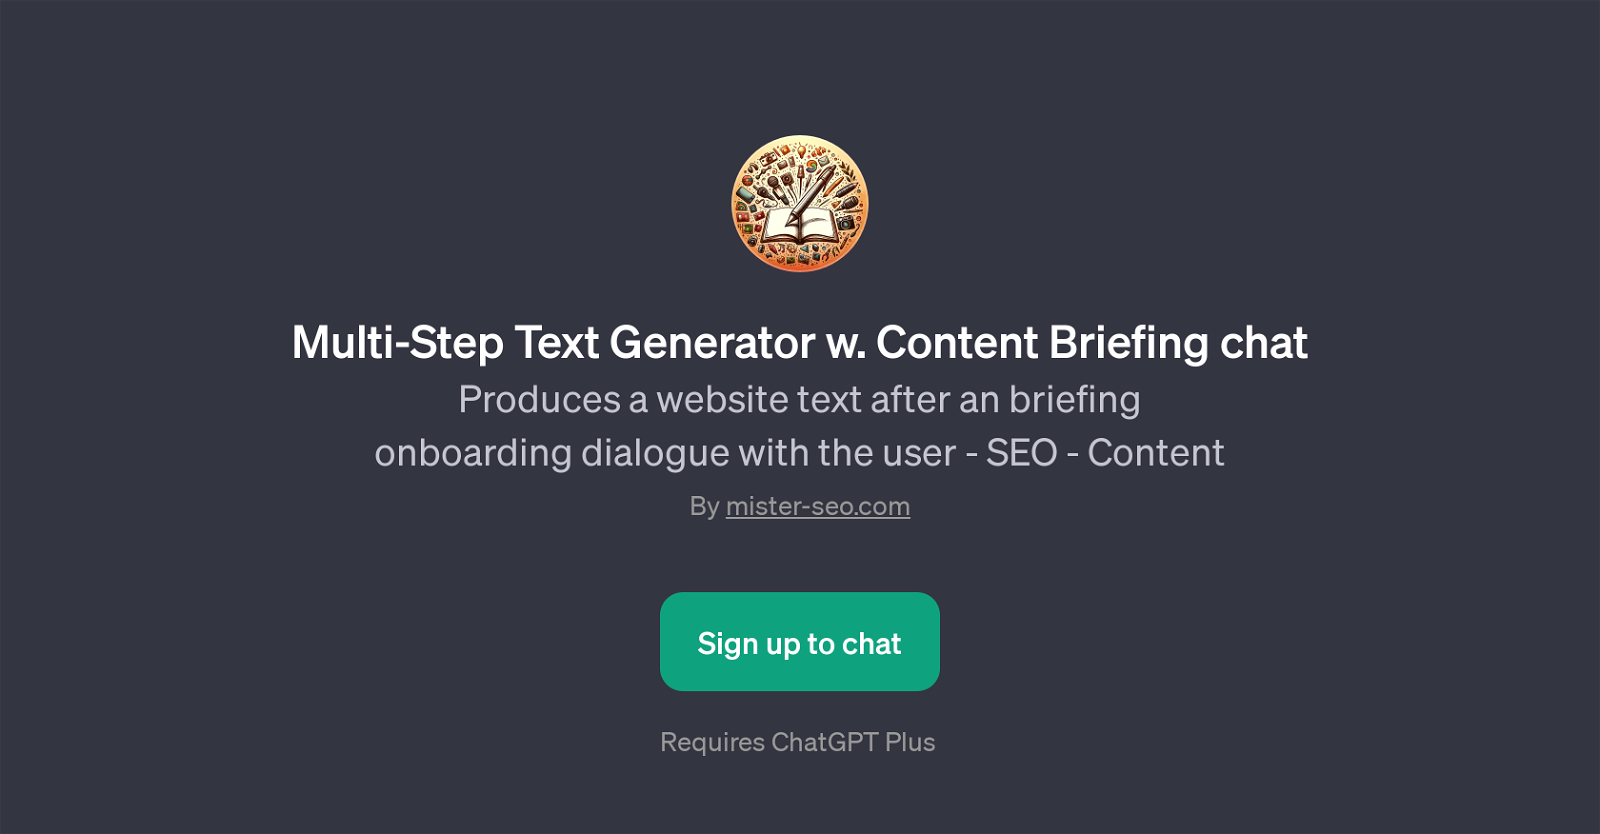 Multi-Step Text Generator w. Content Briefing chat website